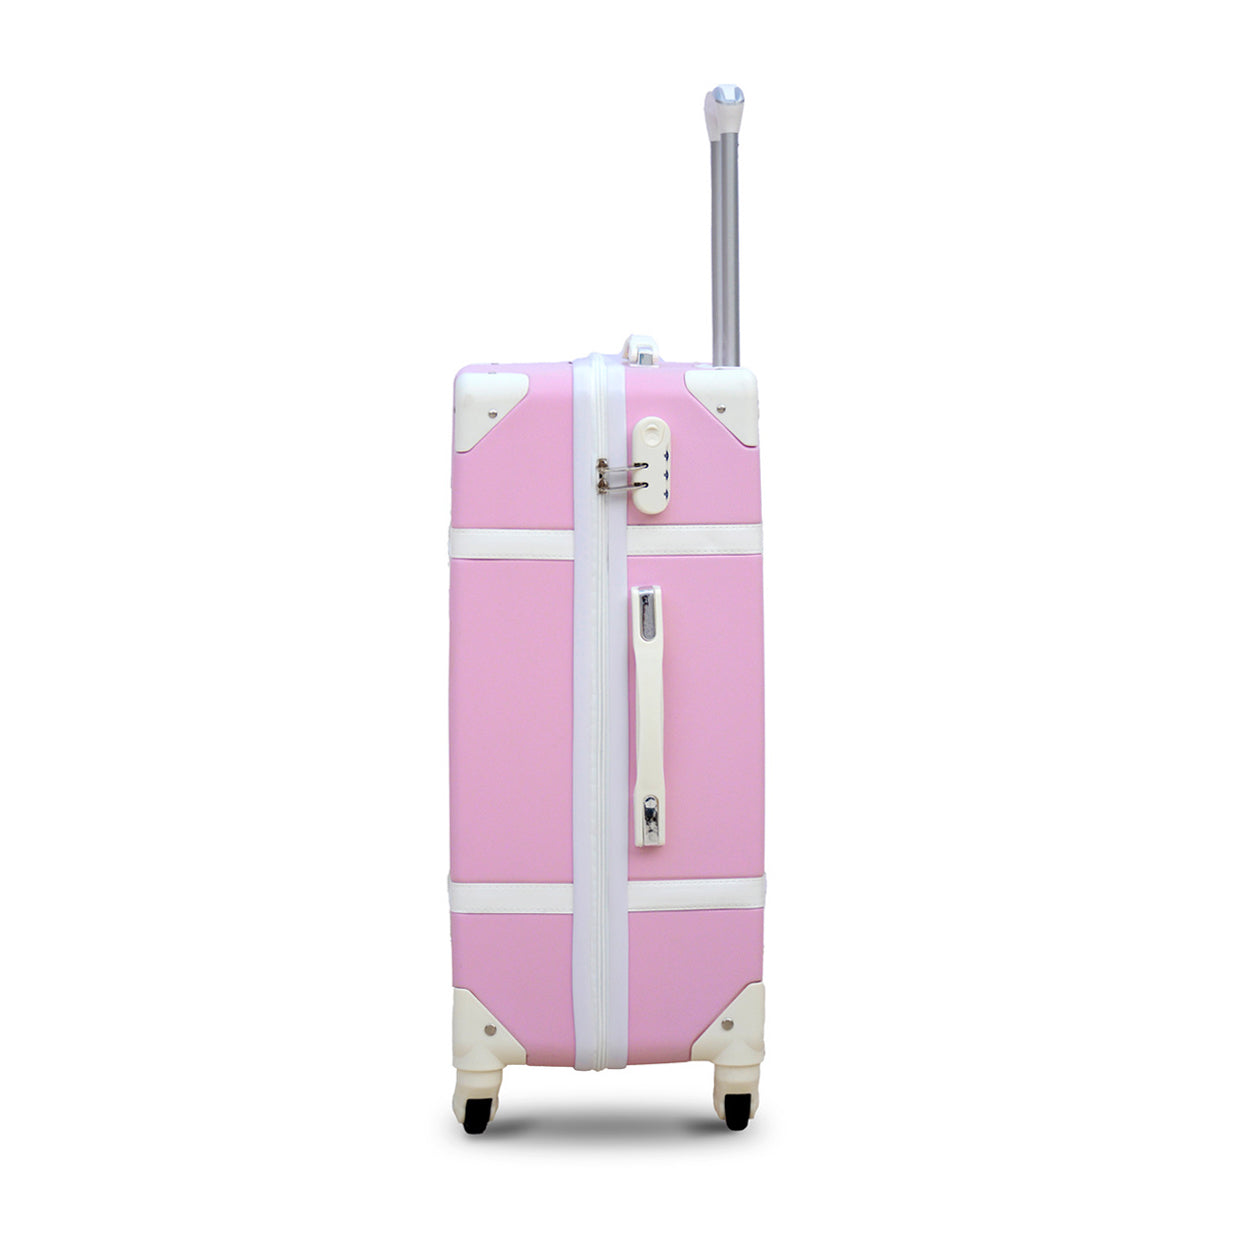 Lightweight ABS Luggage | 4 Pcs Full Set 7” 20” 24” 28 inches Corner Guard Pink Hard Case Trolley Bag